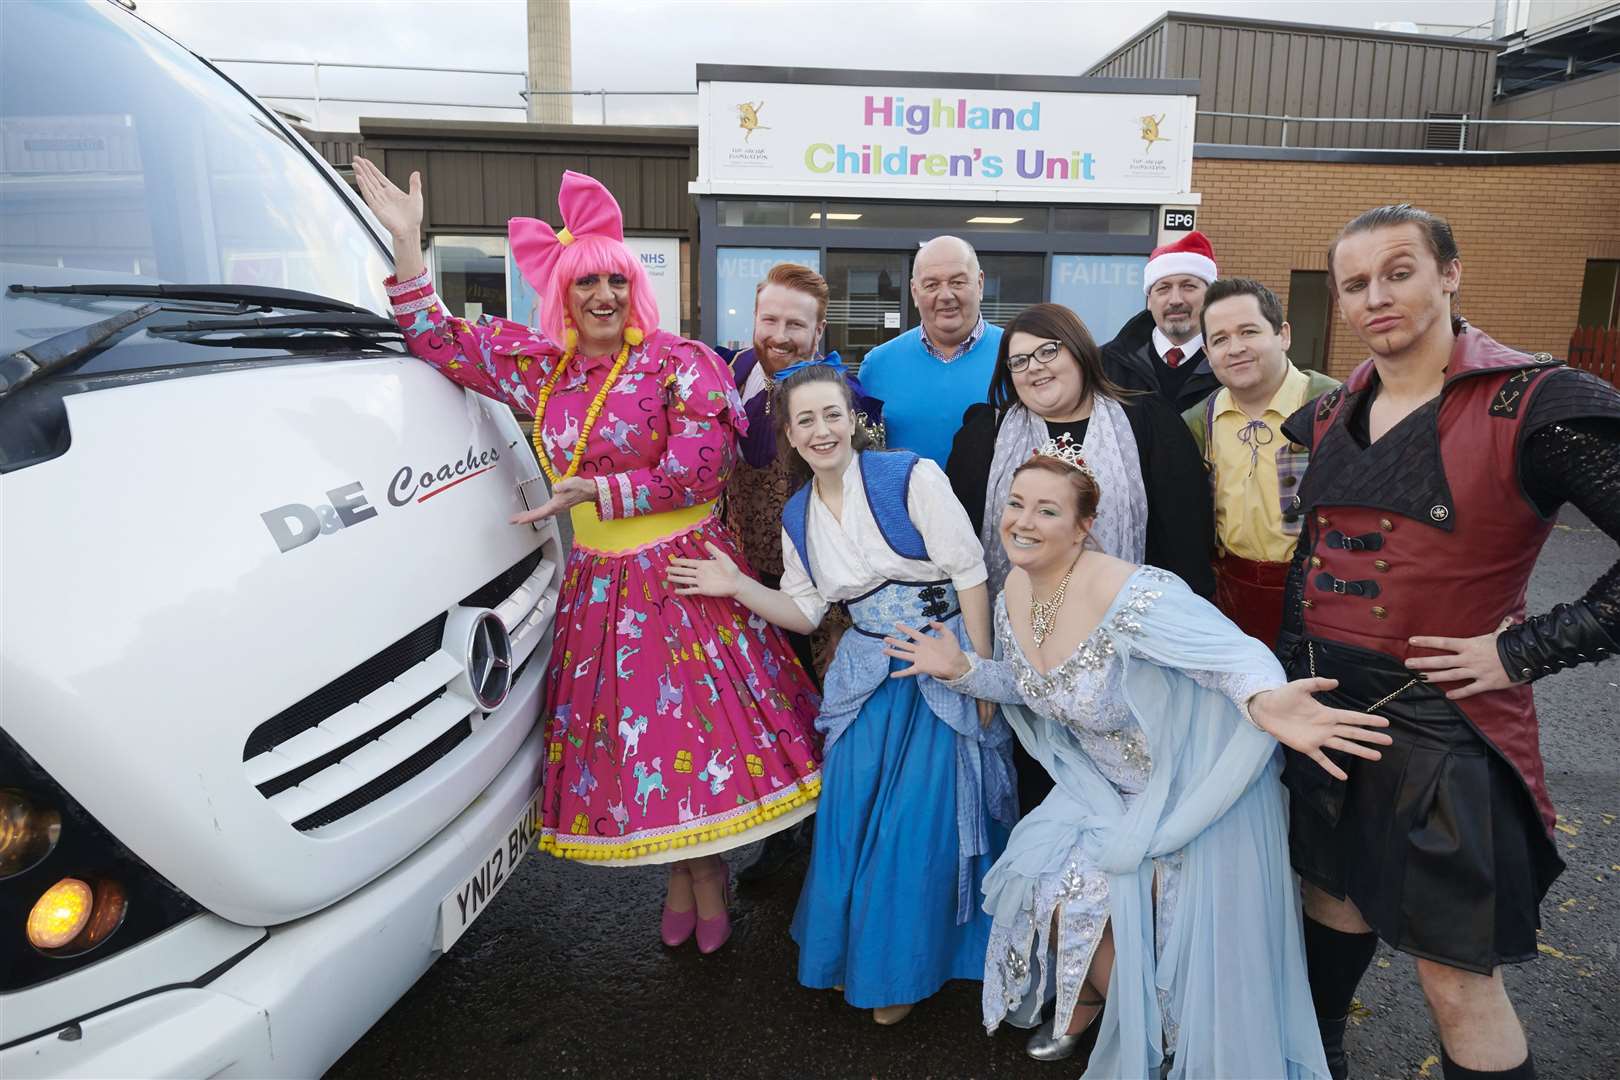 The panto cast with D & E MD Donald Mathieson arrive at Raigmore Hospital.